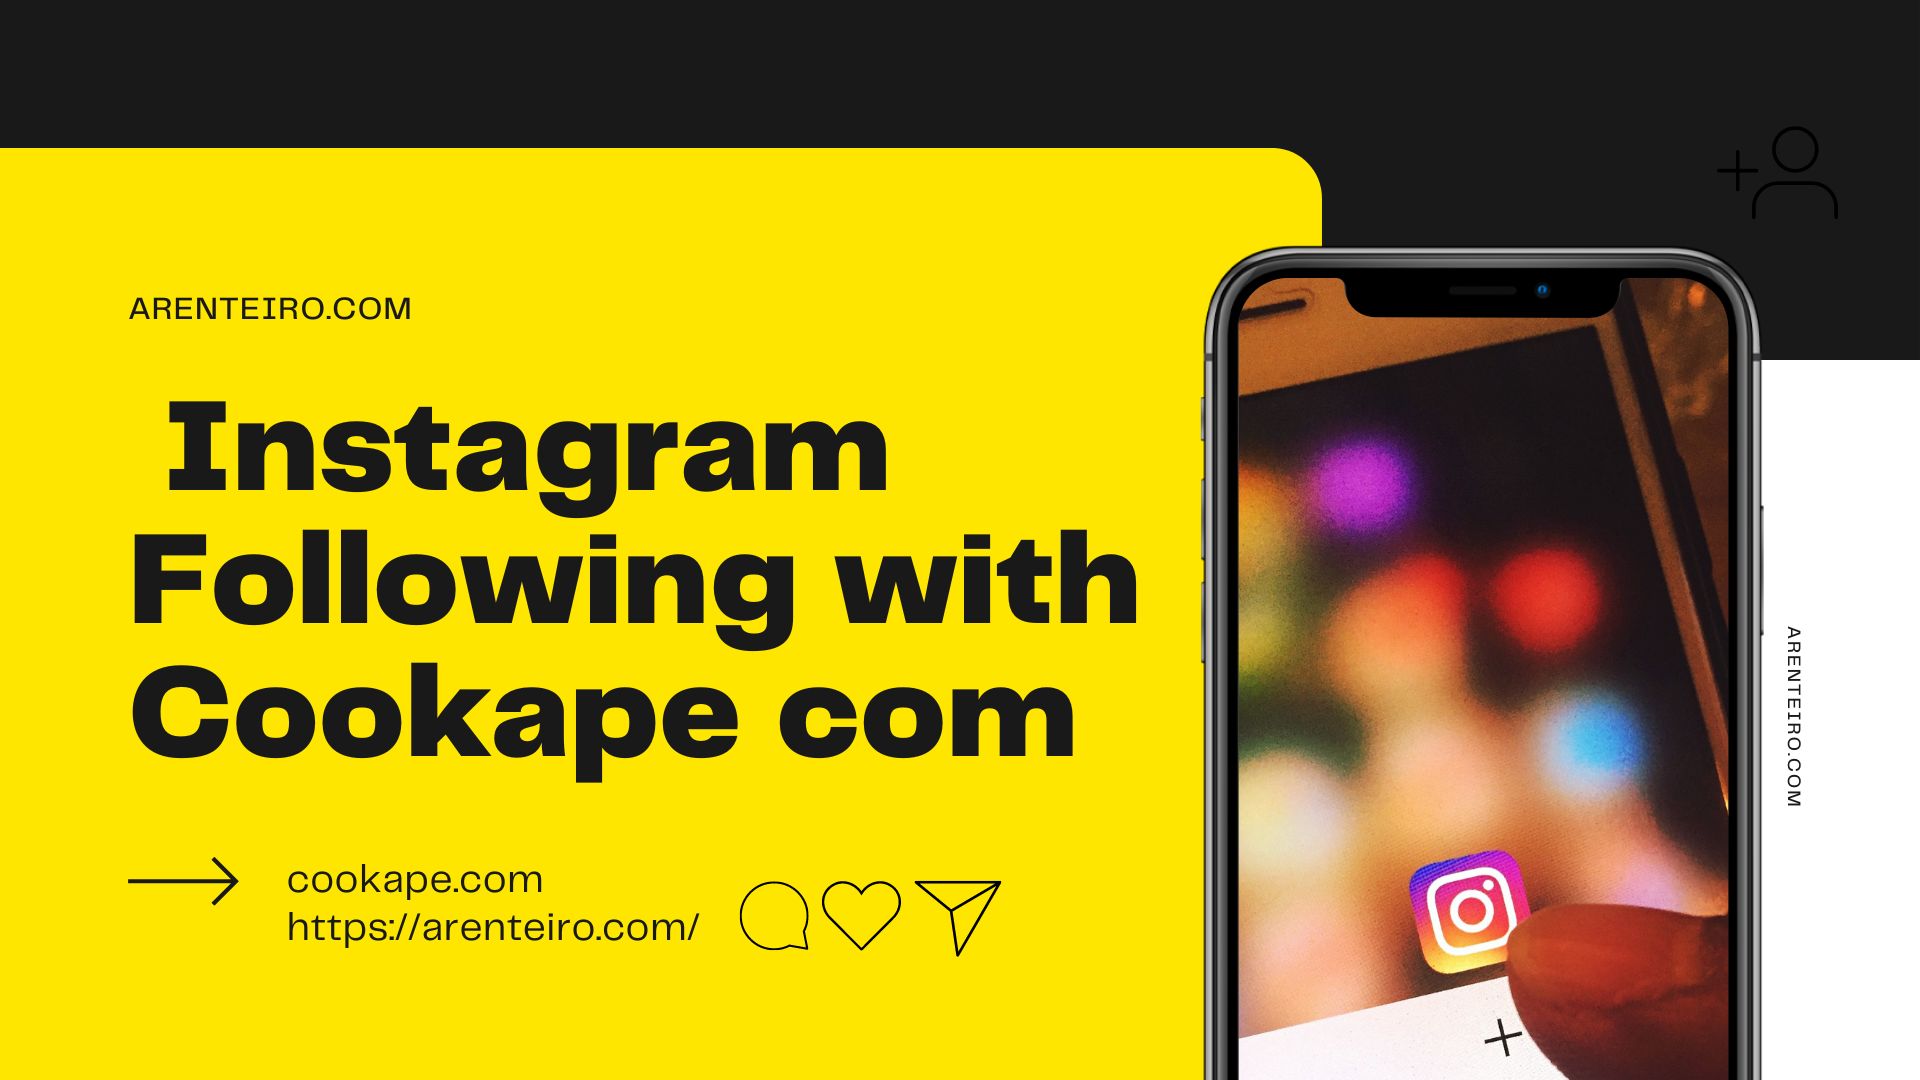 How Does Works Instagram Following with Cookape com